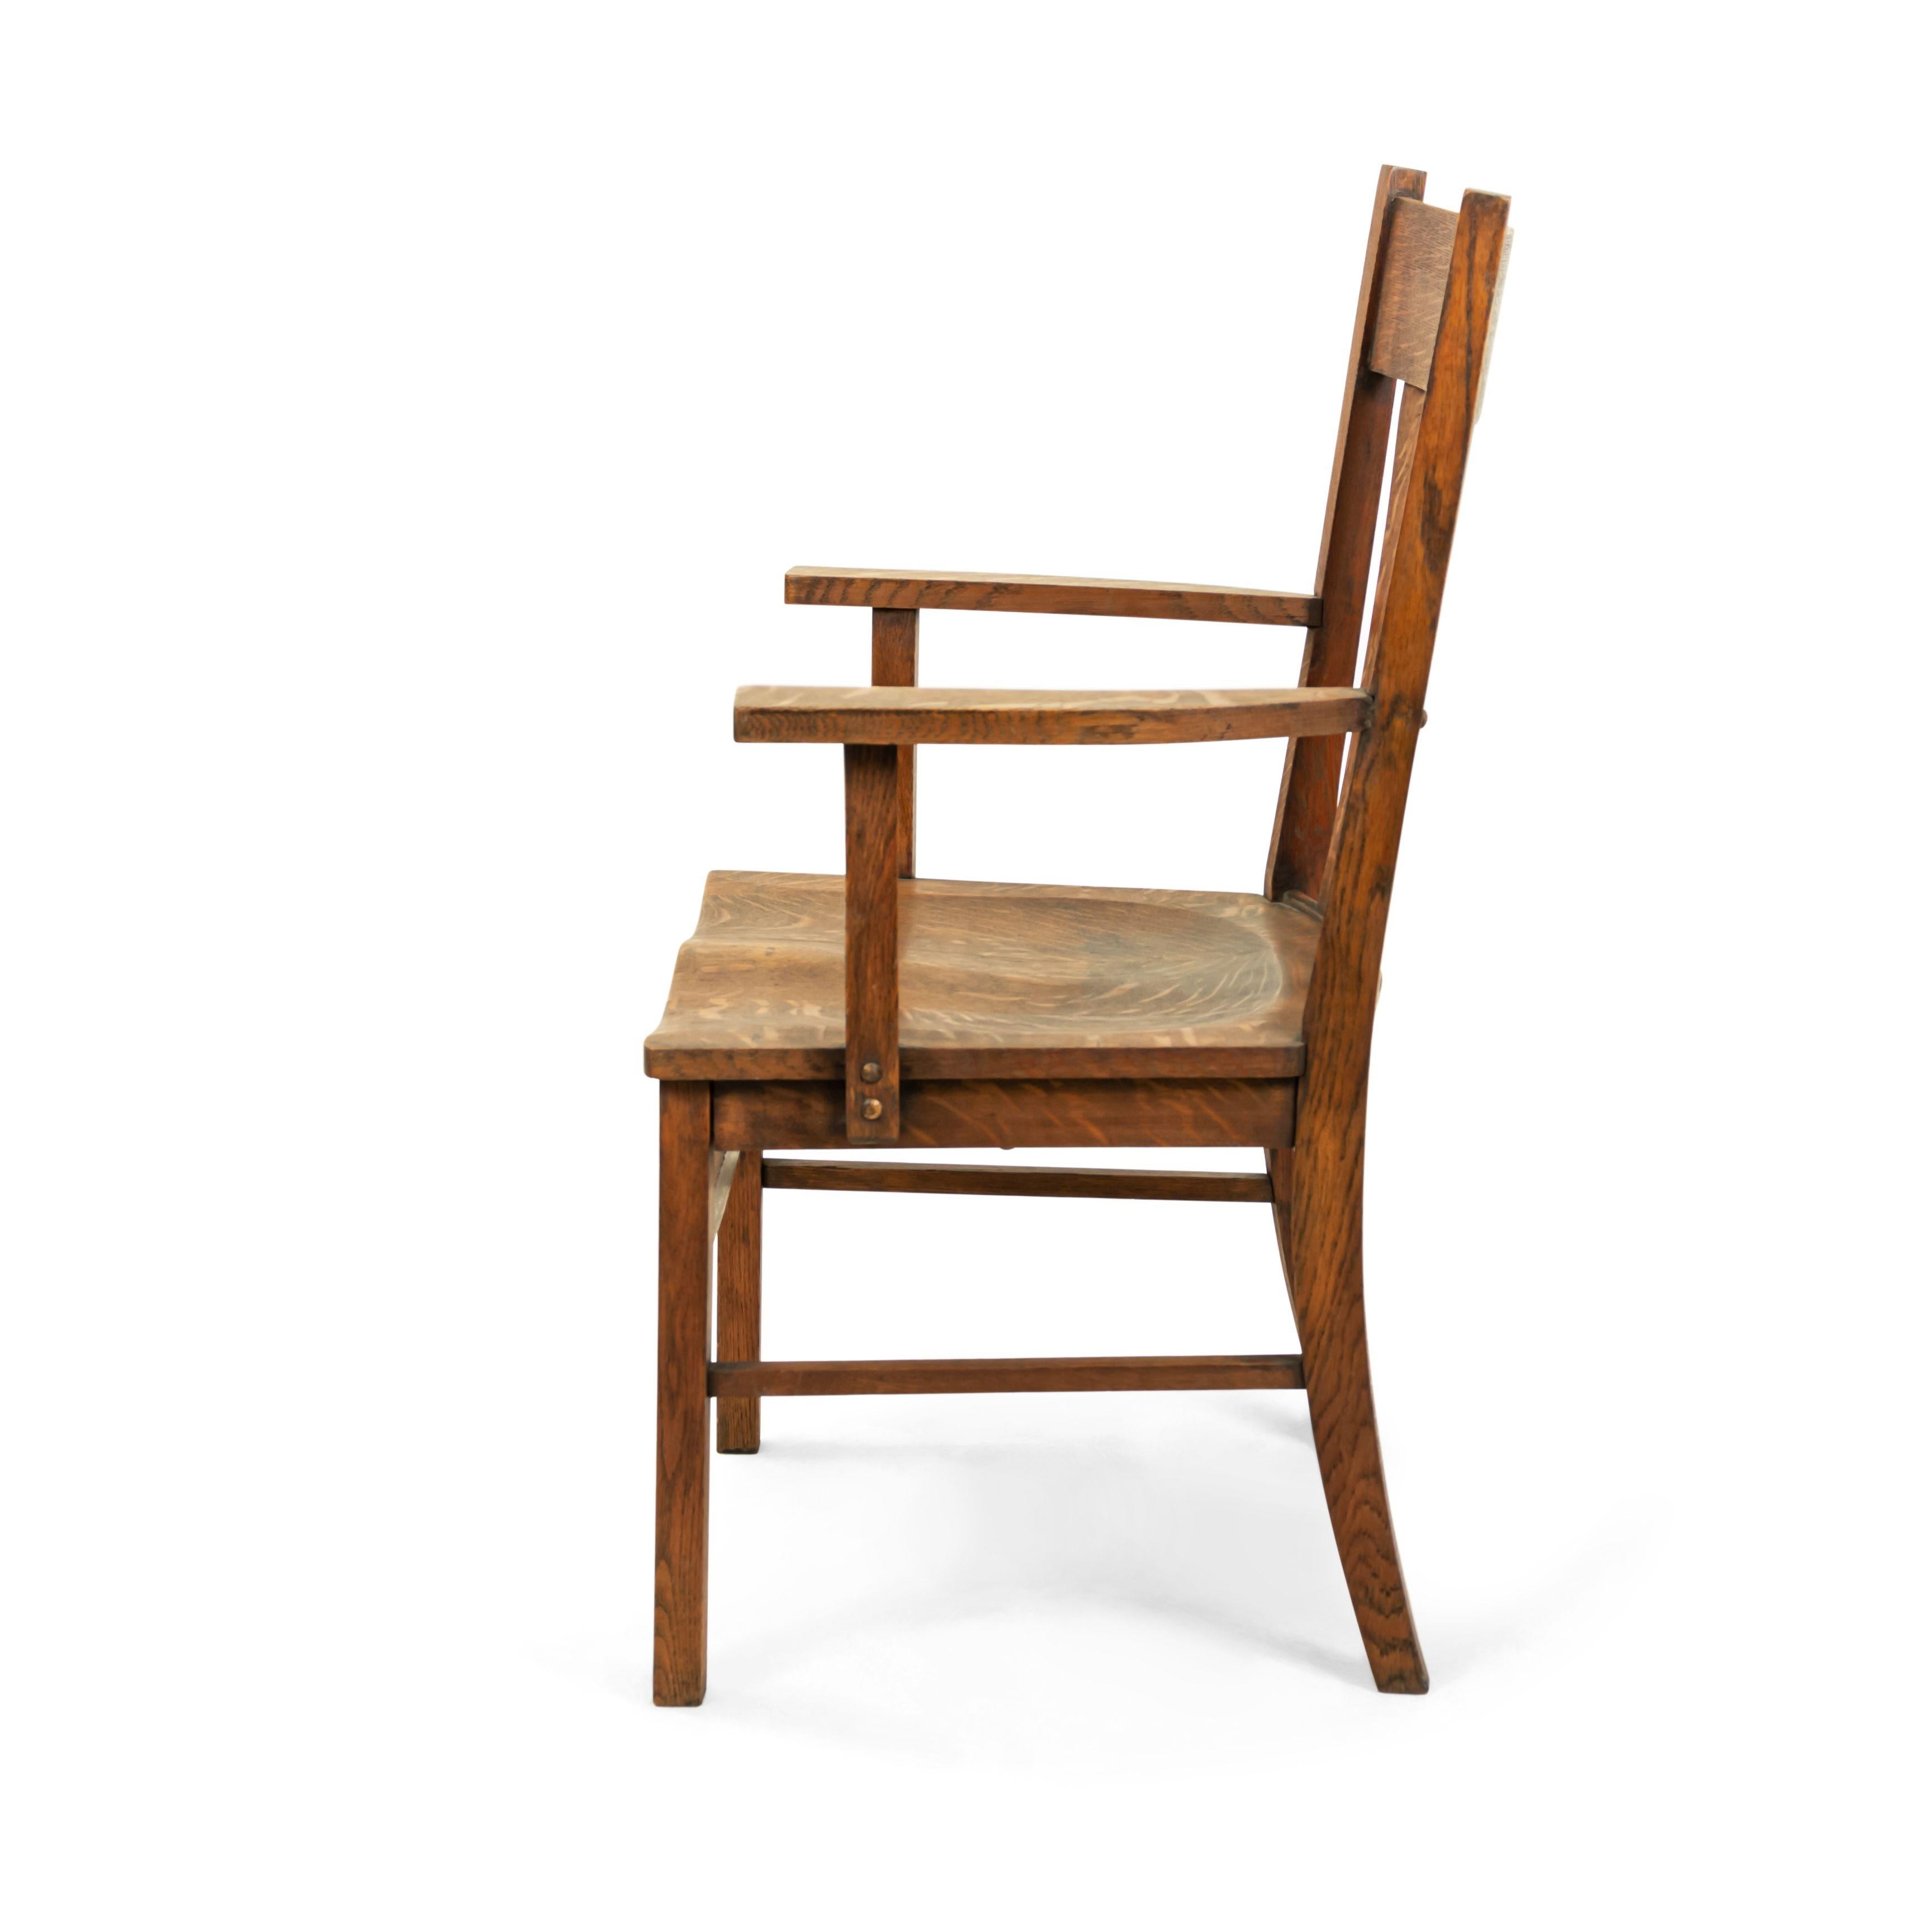 American Mission-style wooden armchair with a four slat back and wooden seat.
 